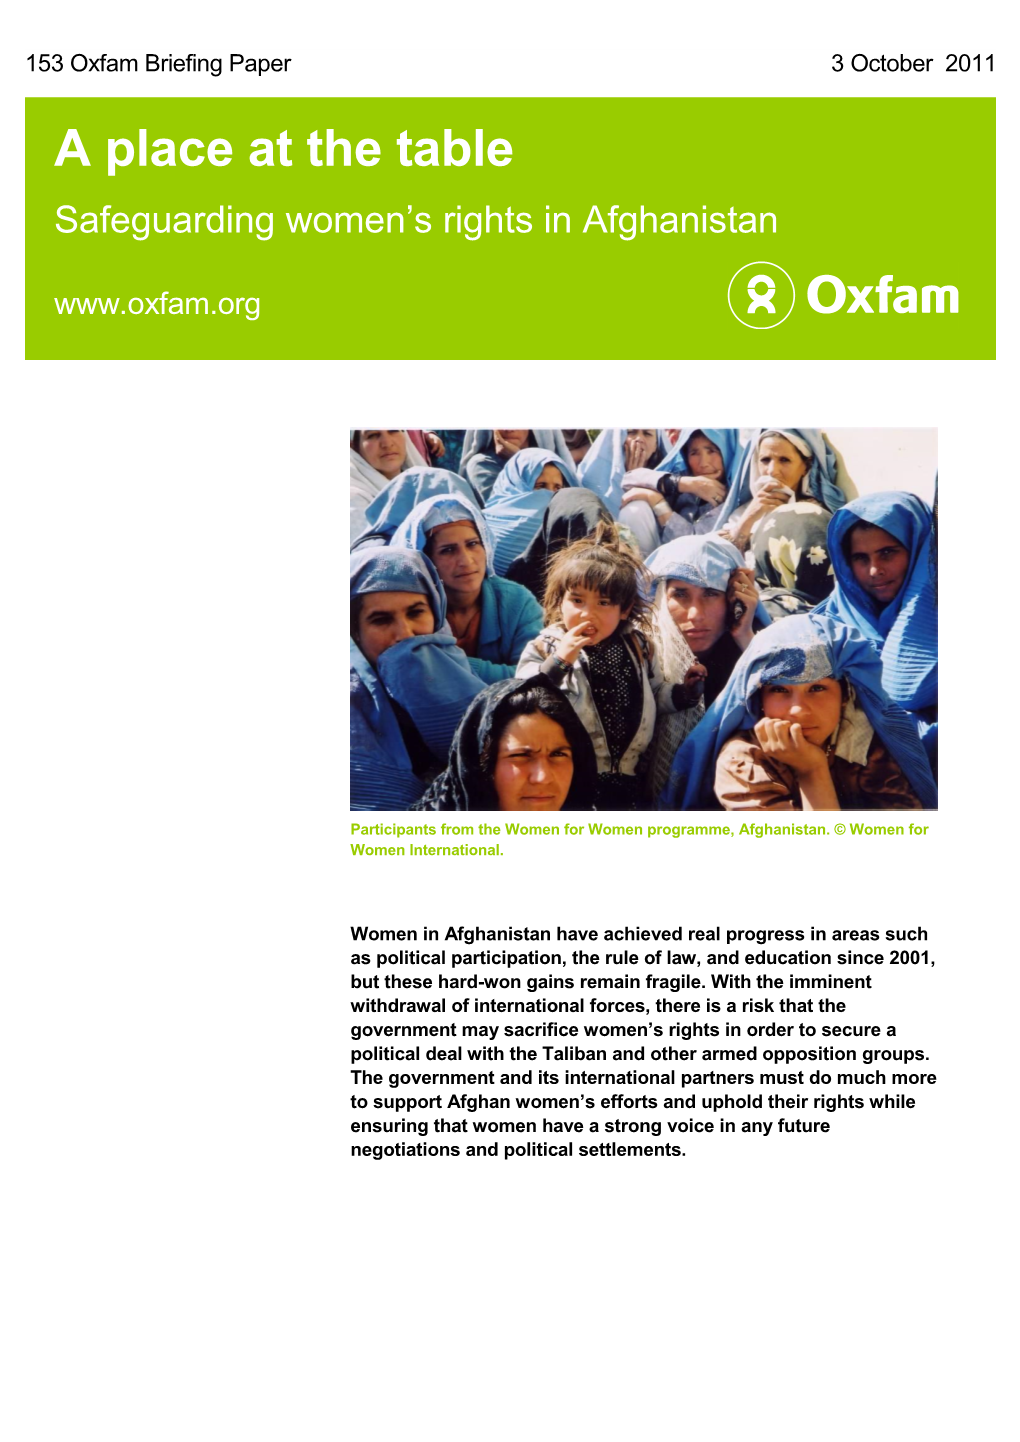 Safeguarding Women's Rights in Afghanistan